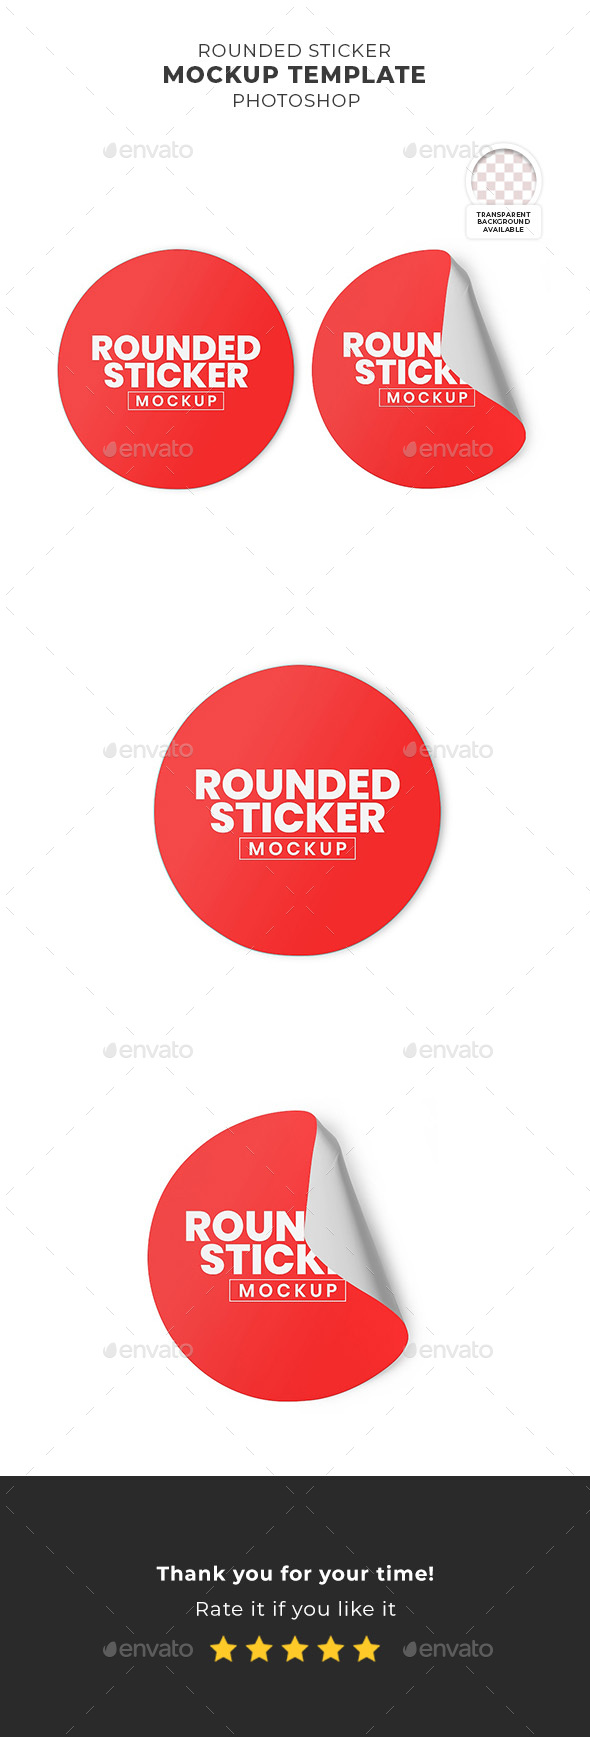 [DOWNLOAD]Rounded Sticker Mockup Template